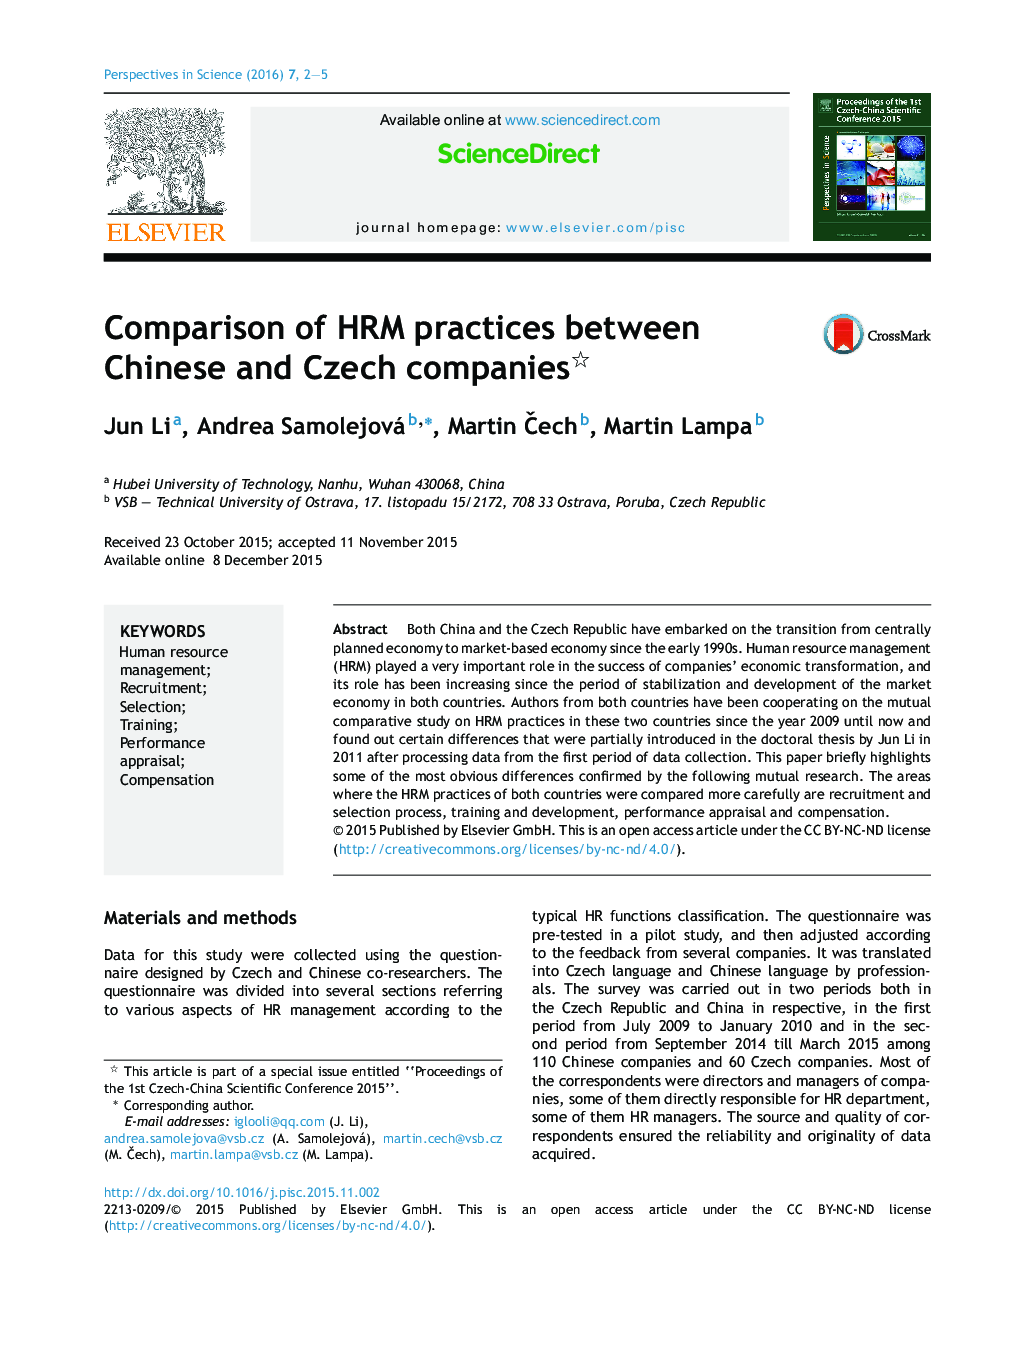 Comparison of HRM practices between Chinese and Czech companies 